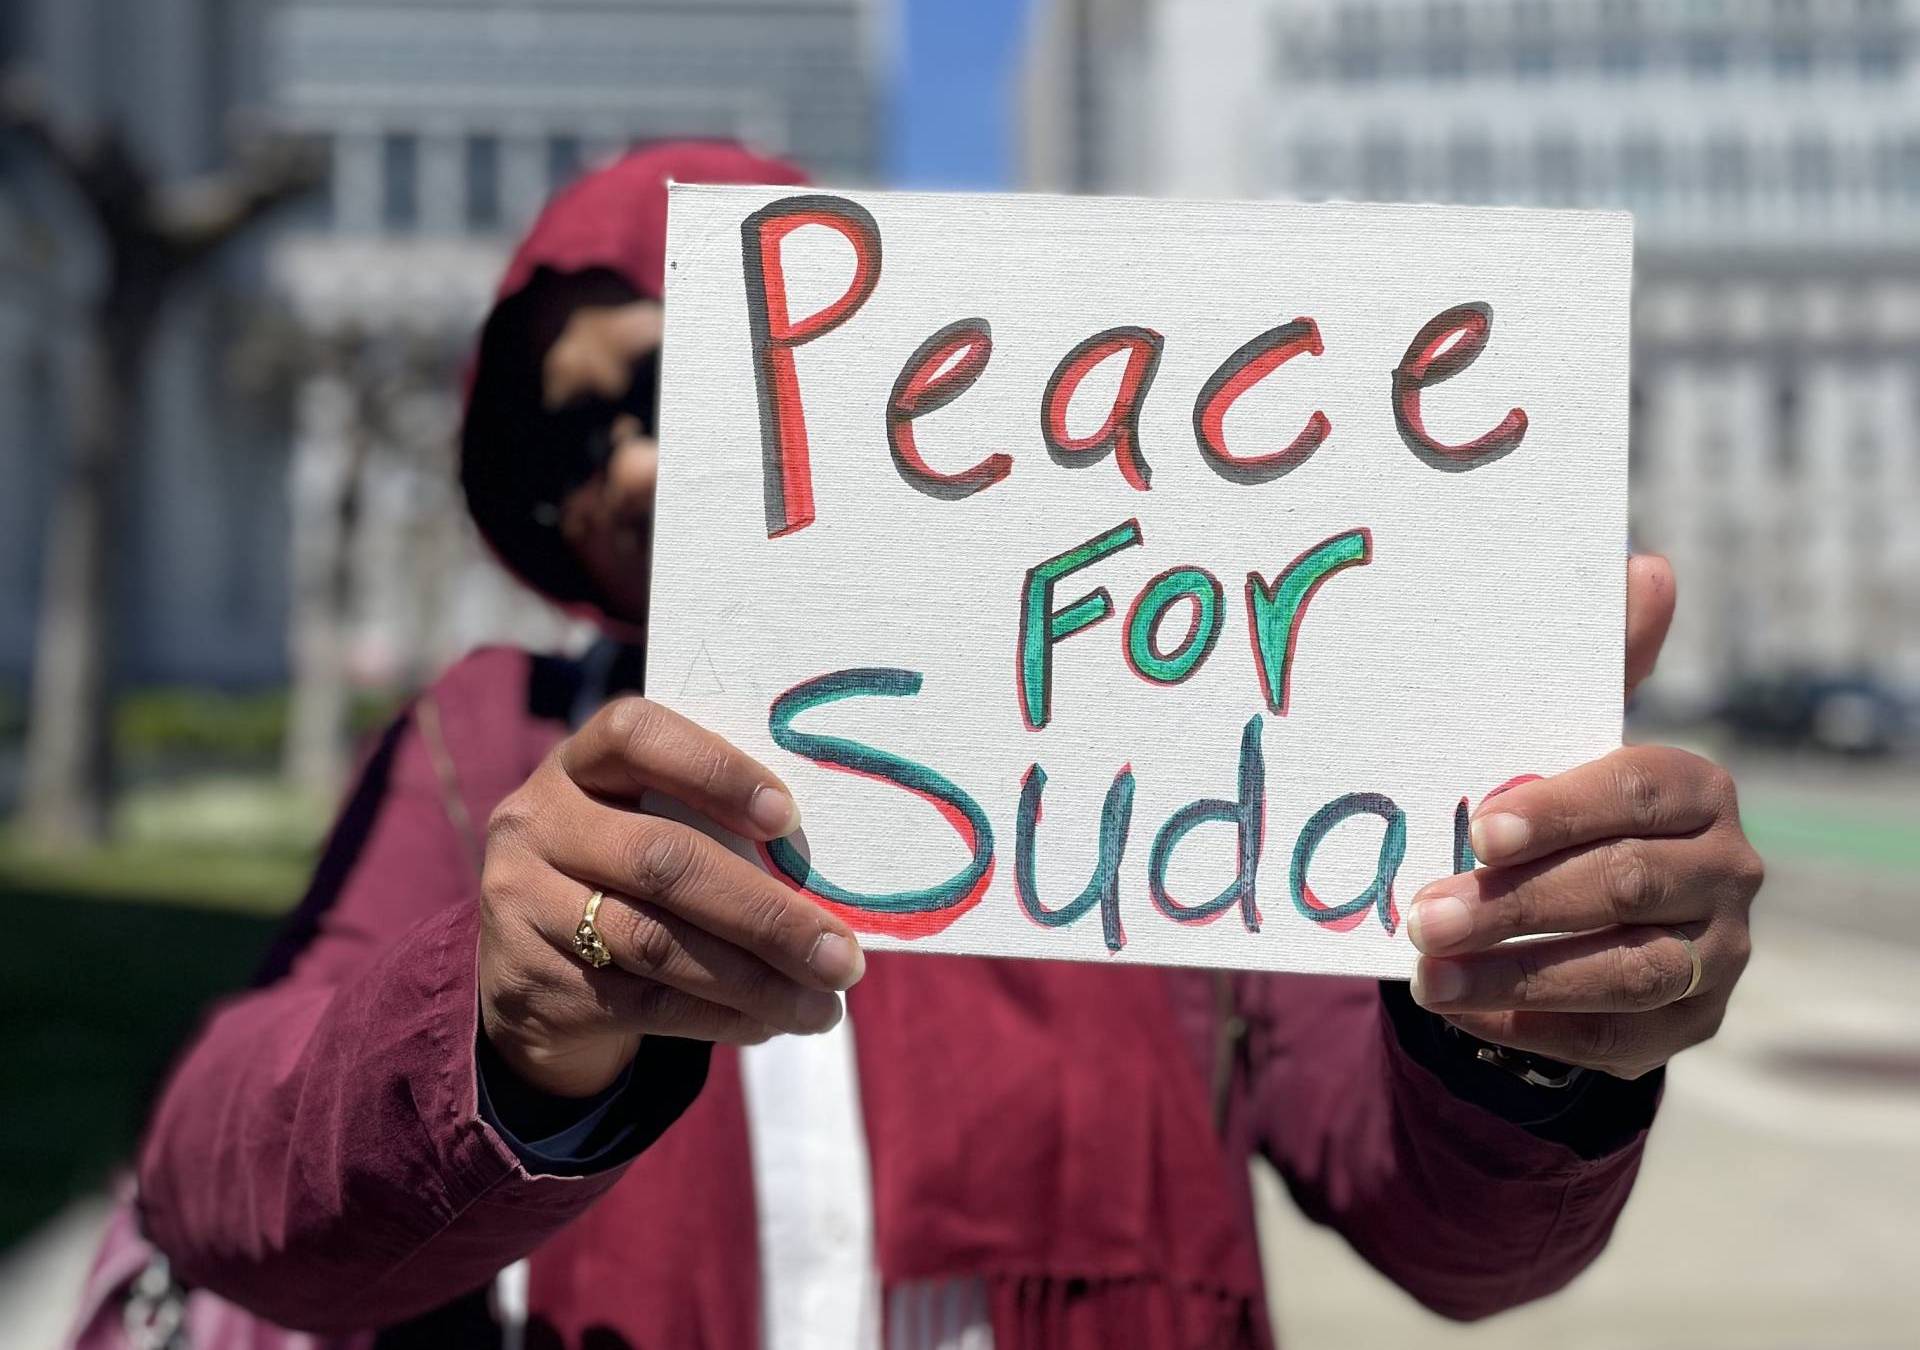 A Sudanese American woman holds a sign that reads "Peace For Sudan"